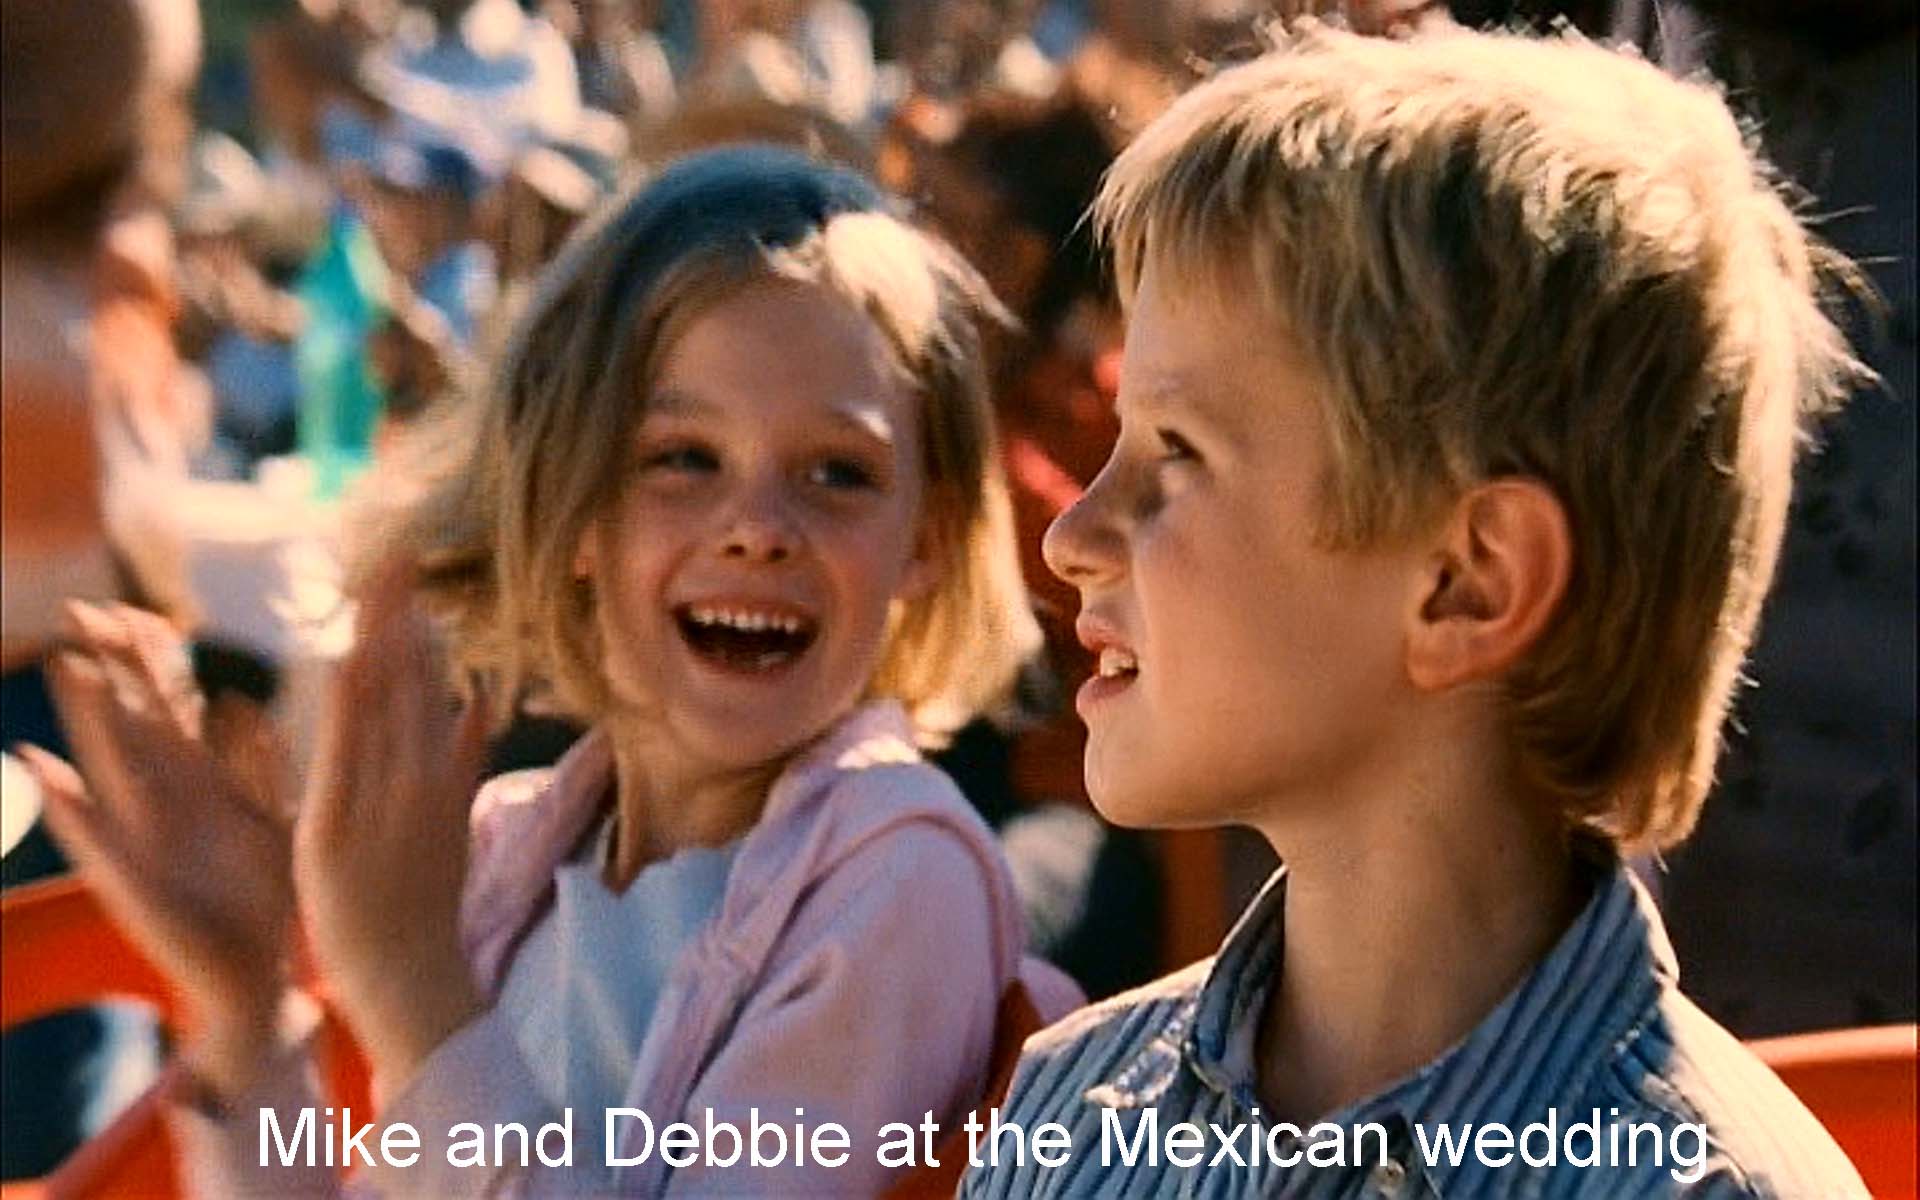 Mike and Debbie at the Mexican wedding